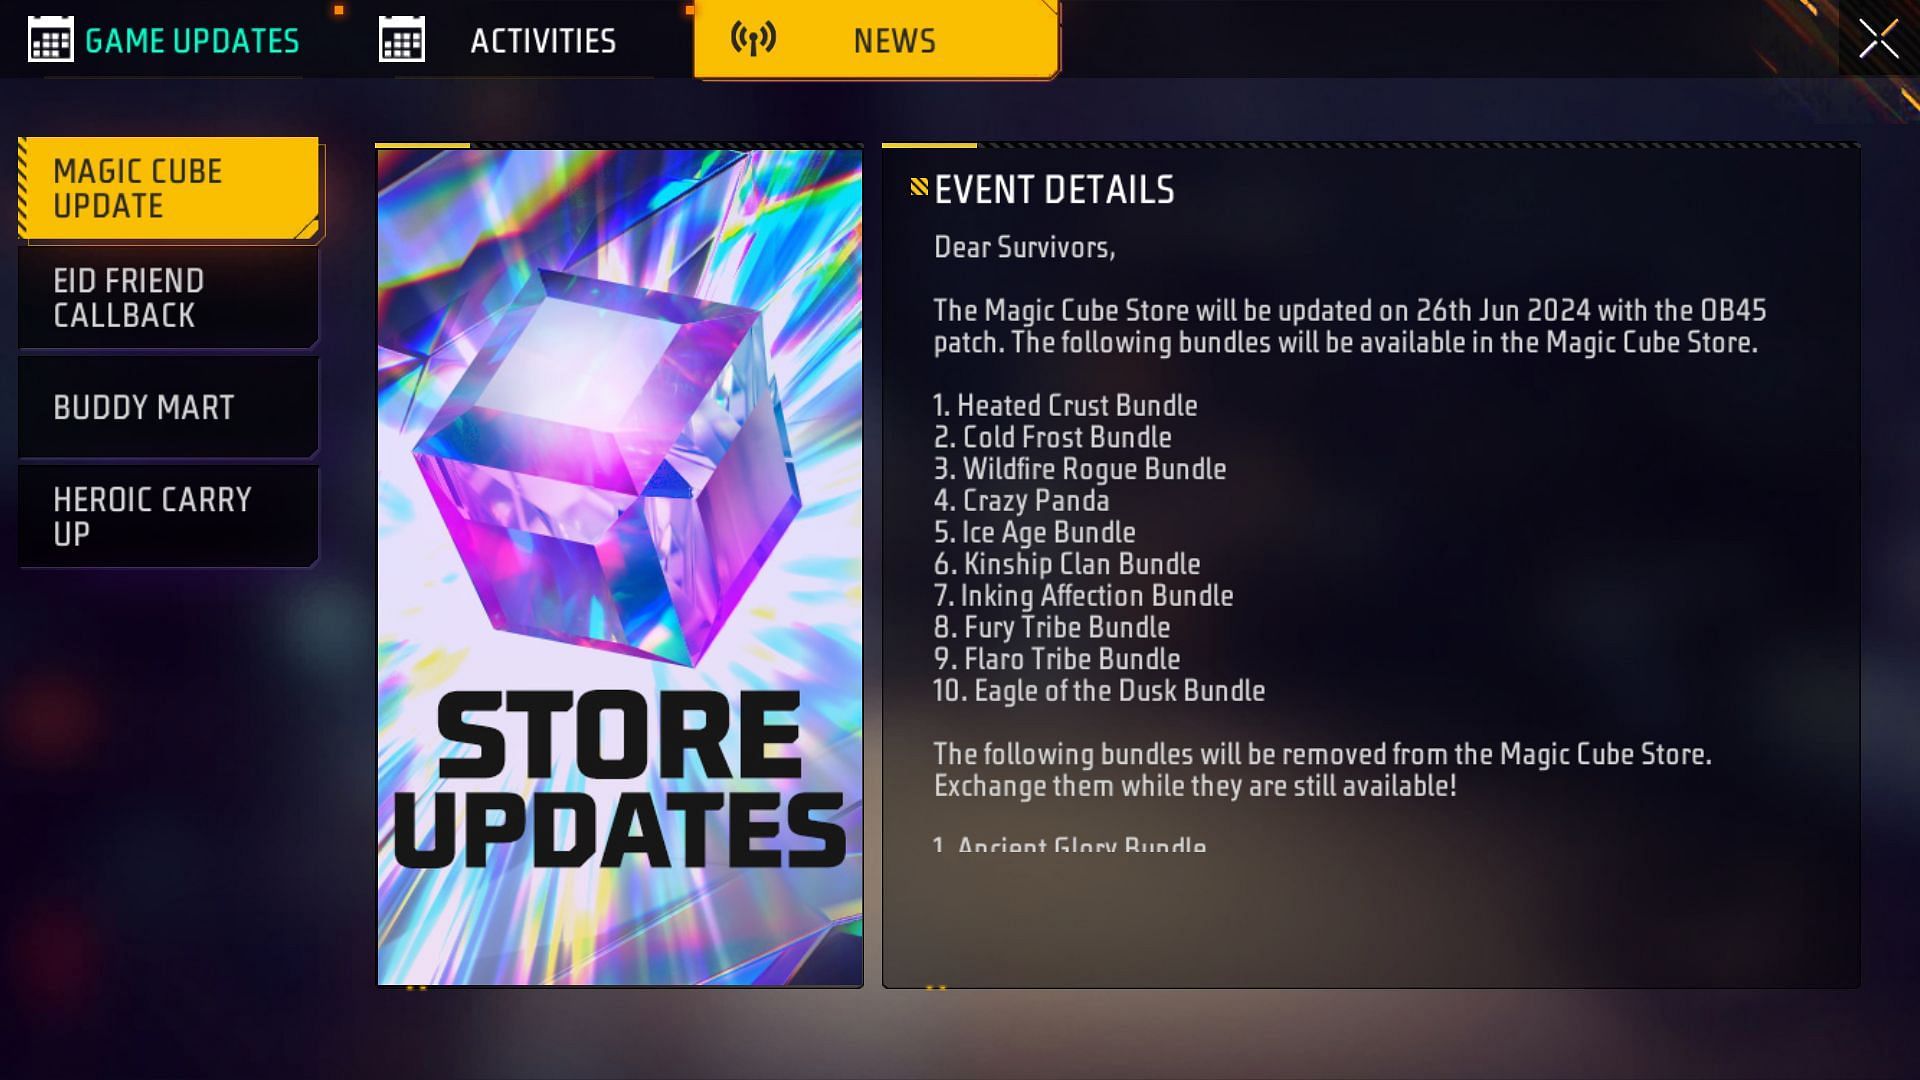 New Magic Cube bundles are being made available (Image via Garena)